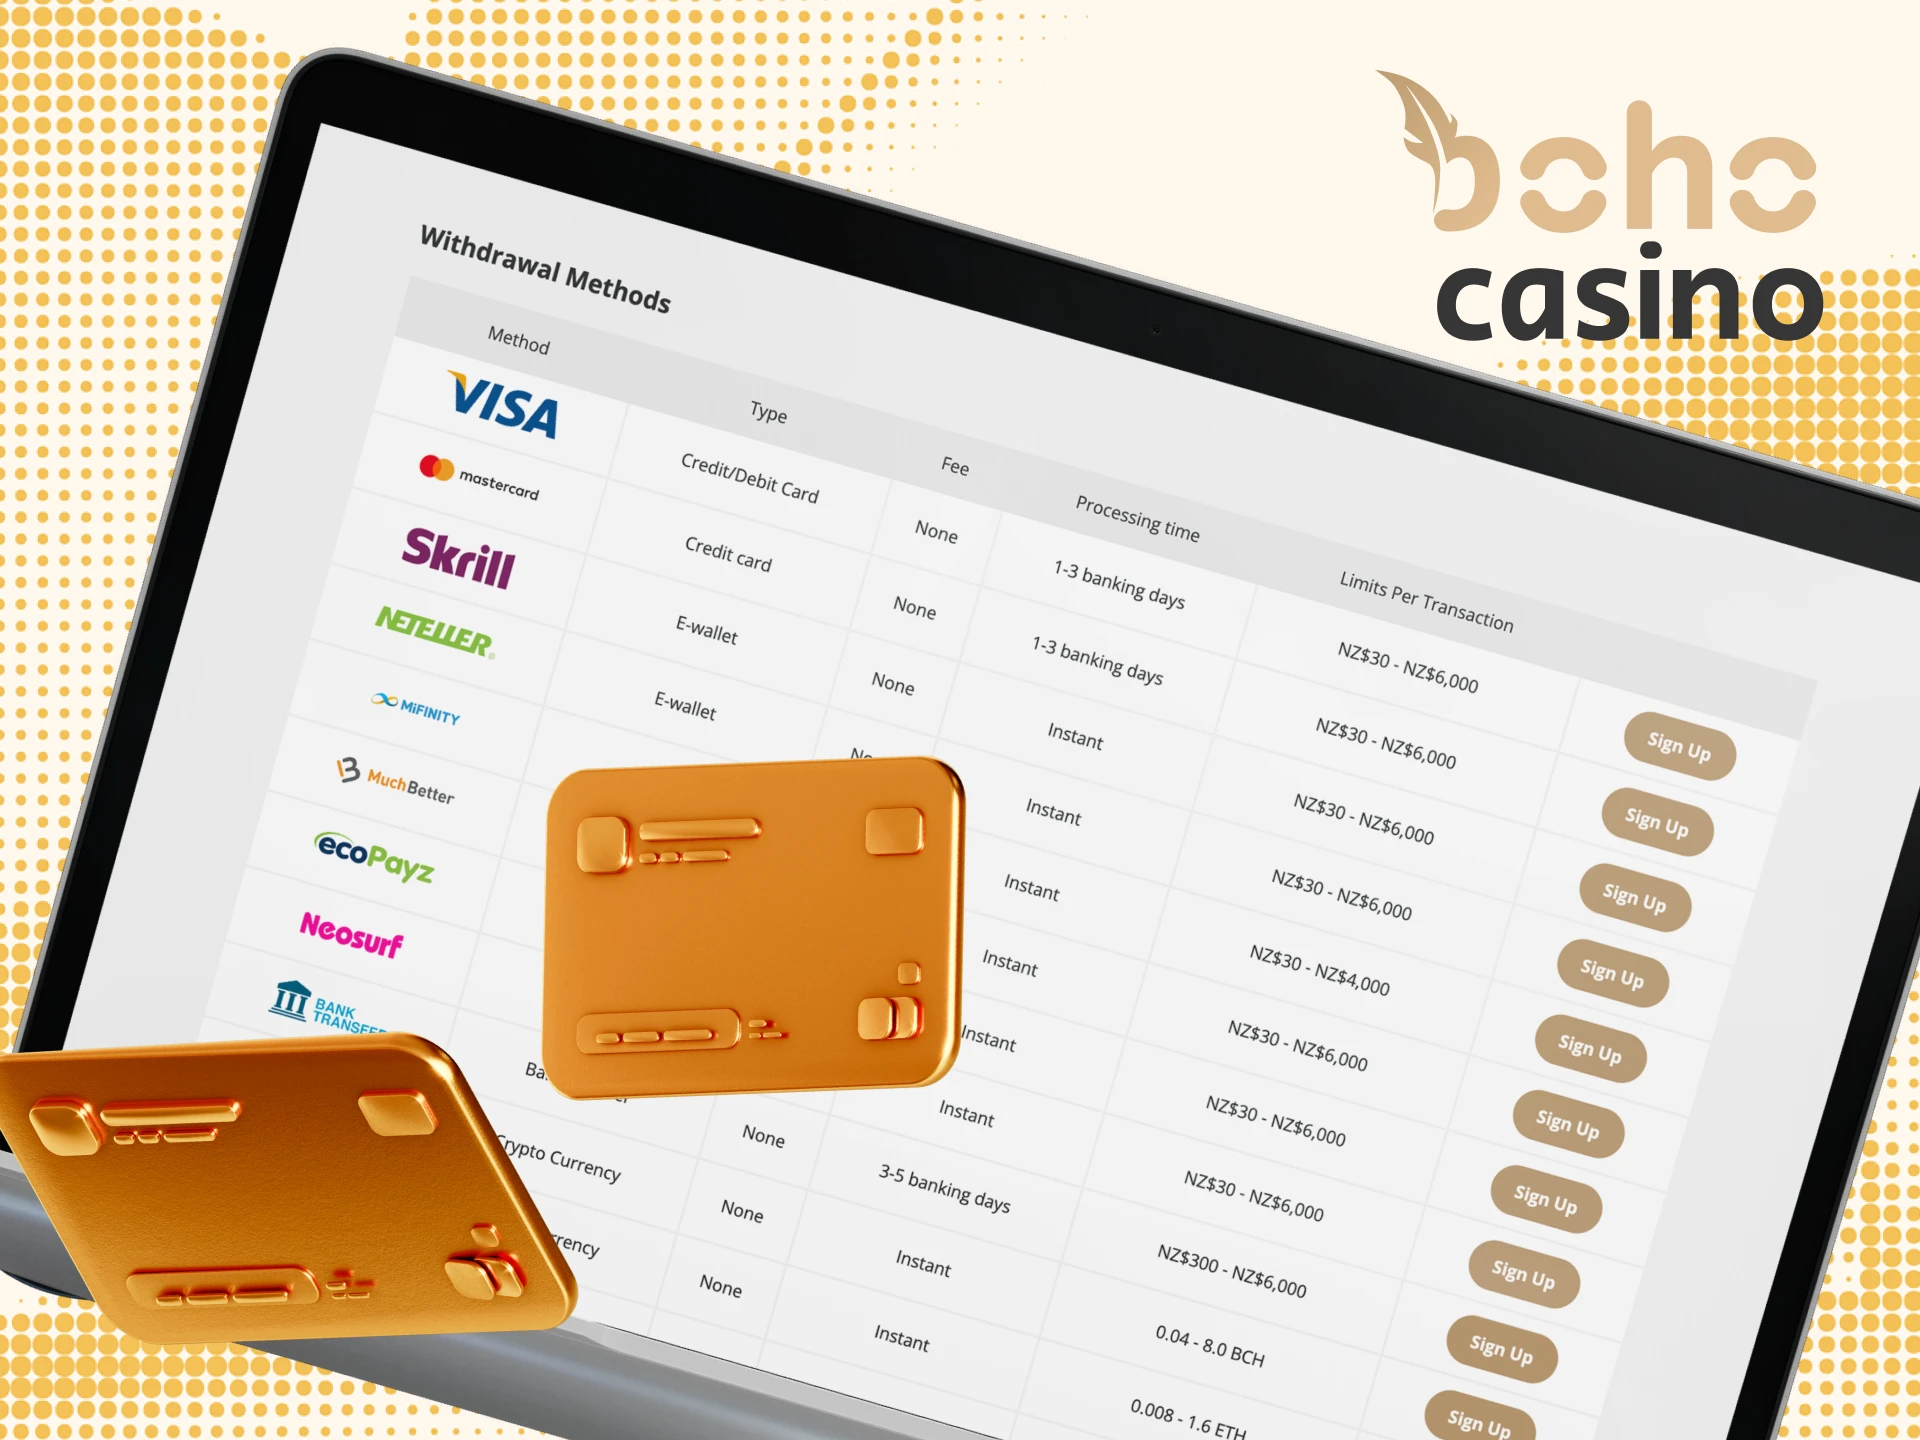 What are the methods for depositing and withdrawing money from your account on the Boho online casino website.